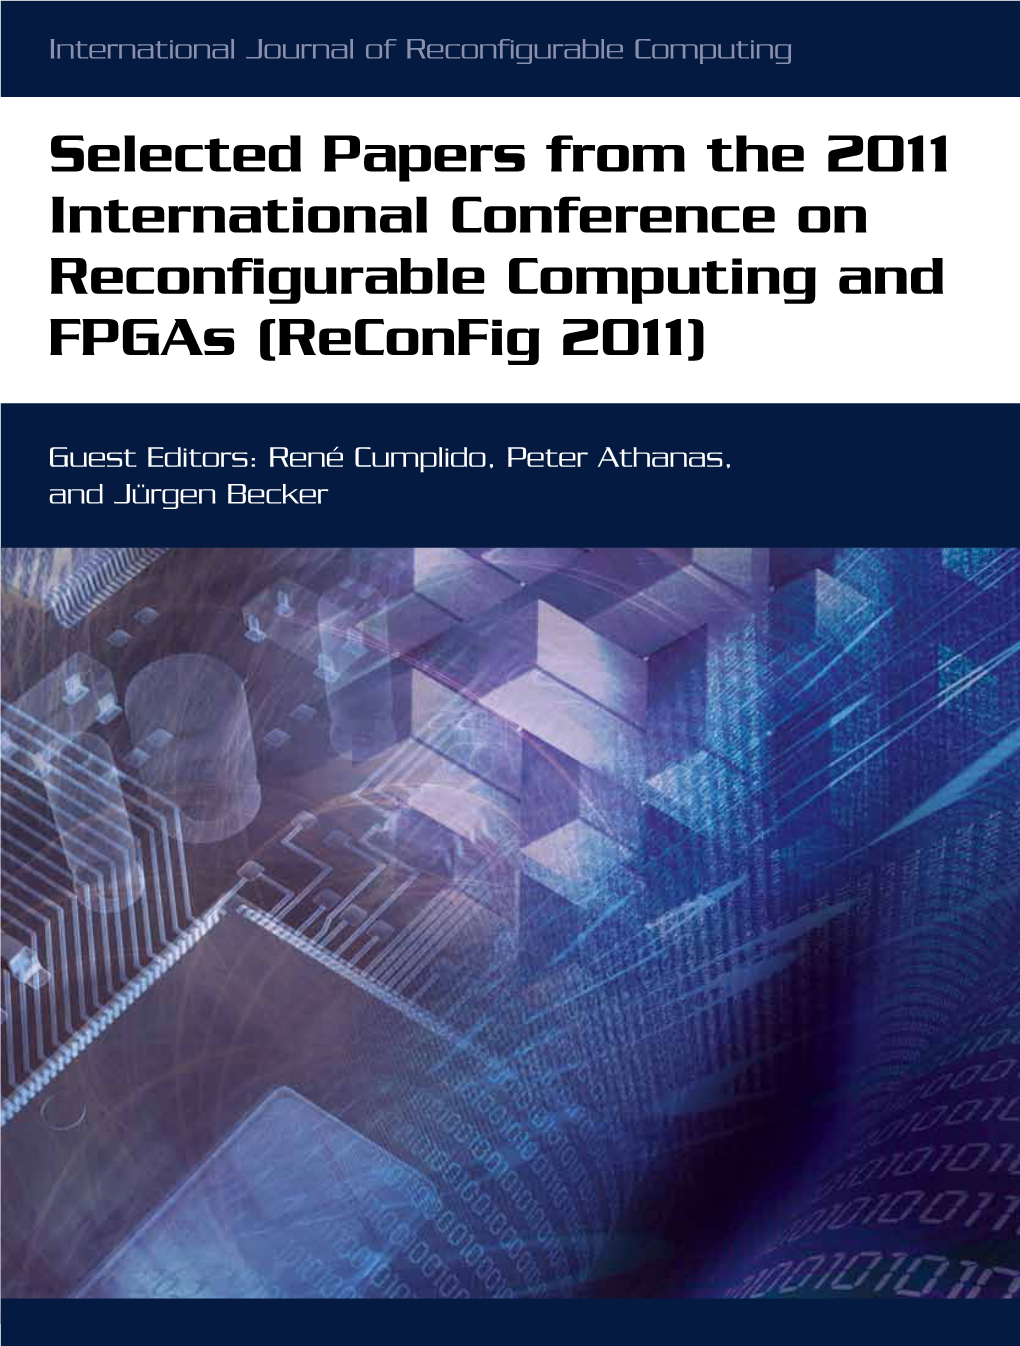 Selected Papers from the 2011 International Conference on Reconfigurable Computing and Fpgas (Reconfig 2011)